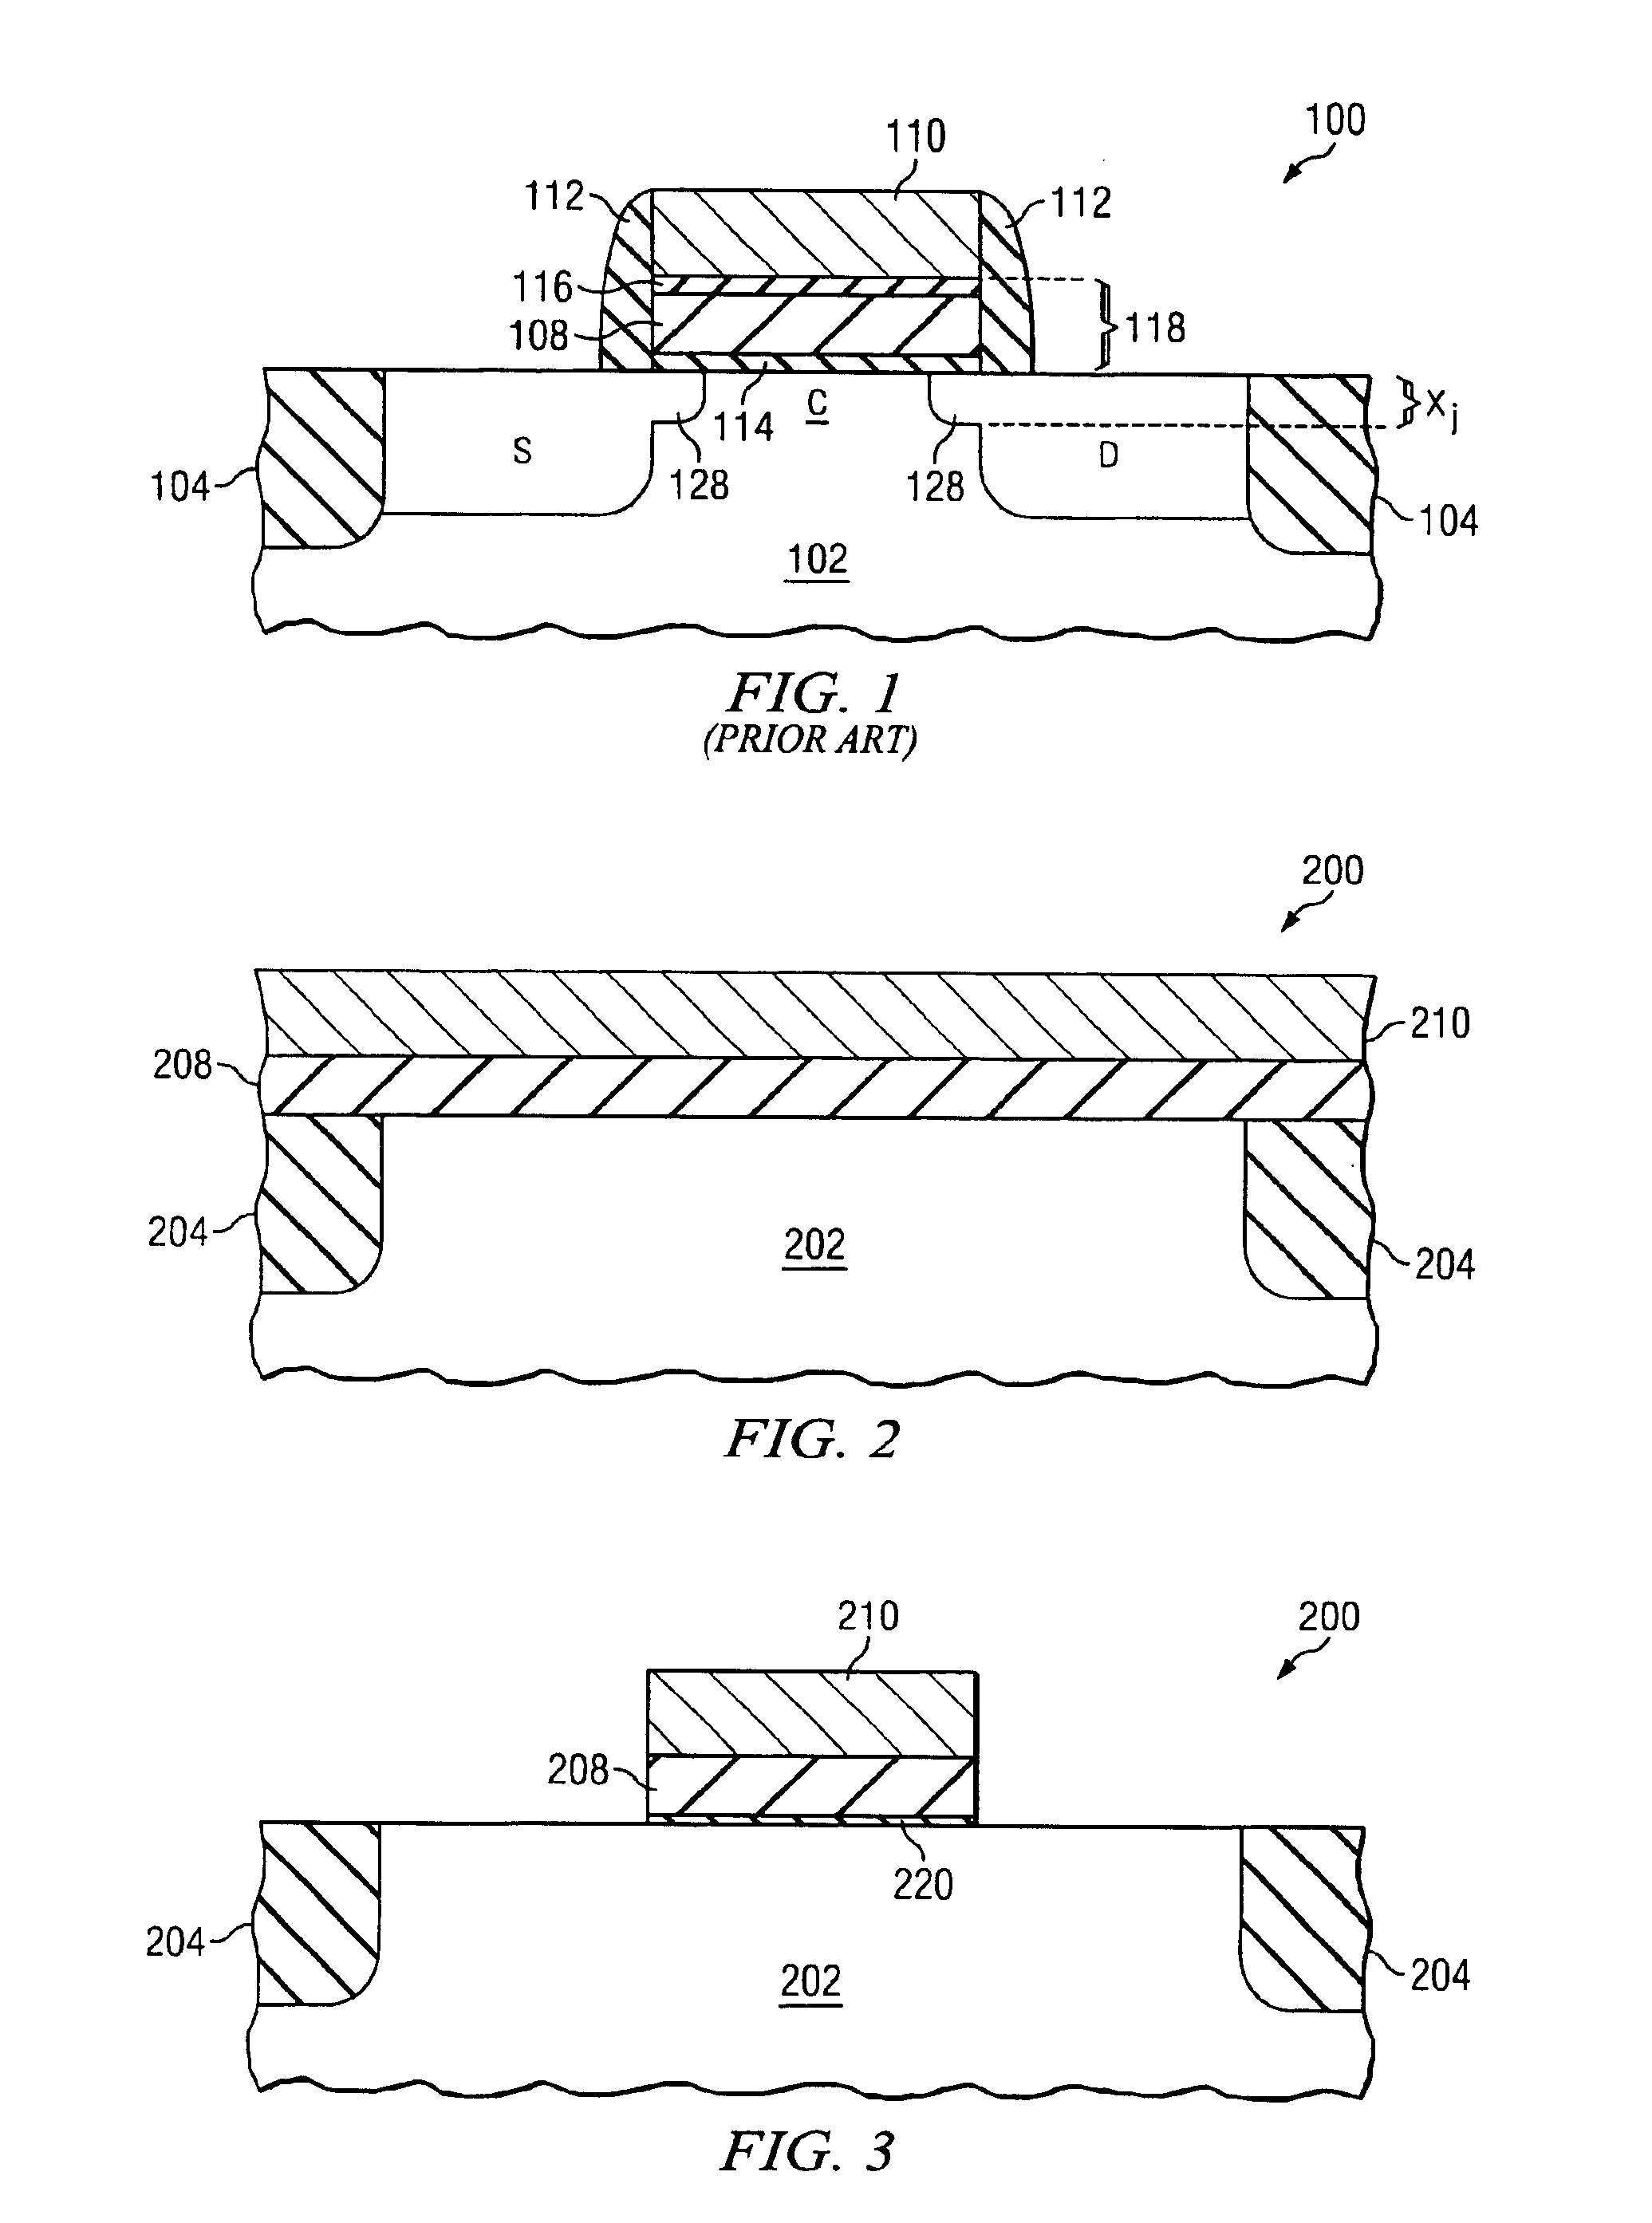 Transistor with dopant-bearing metal in source and drain